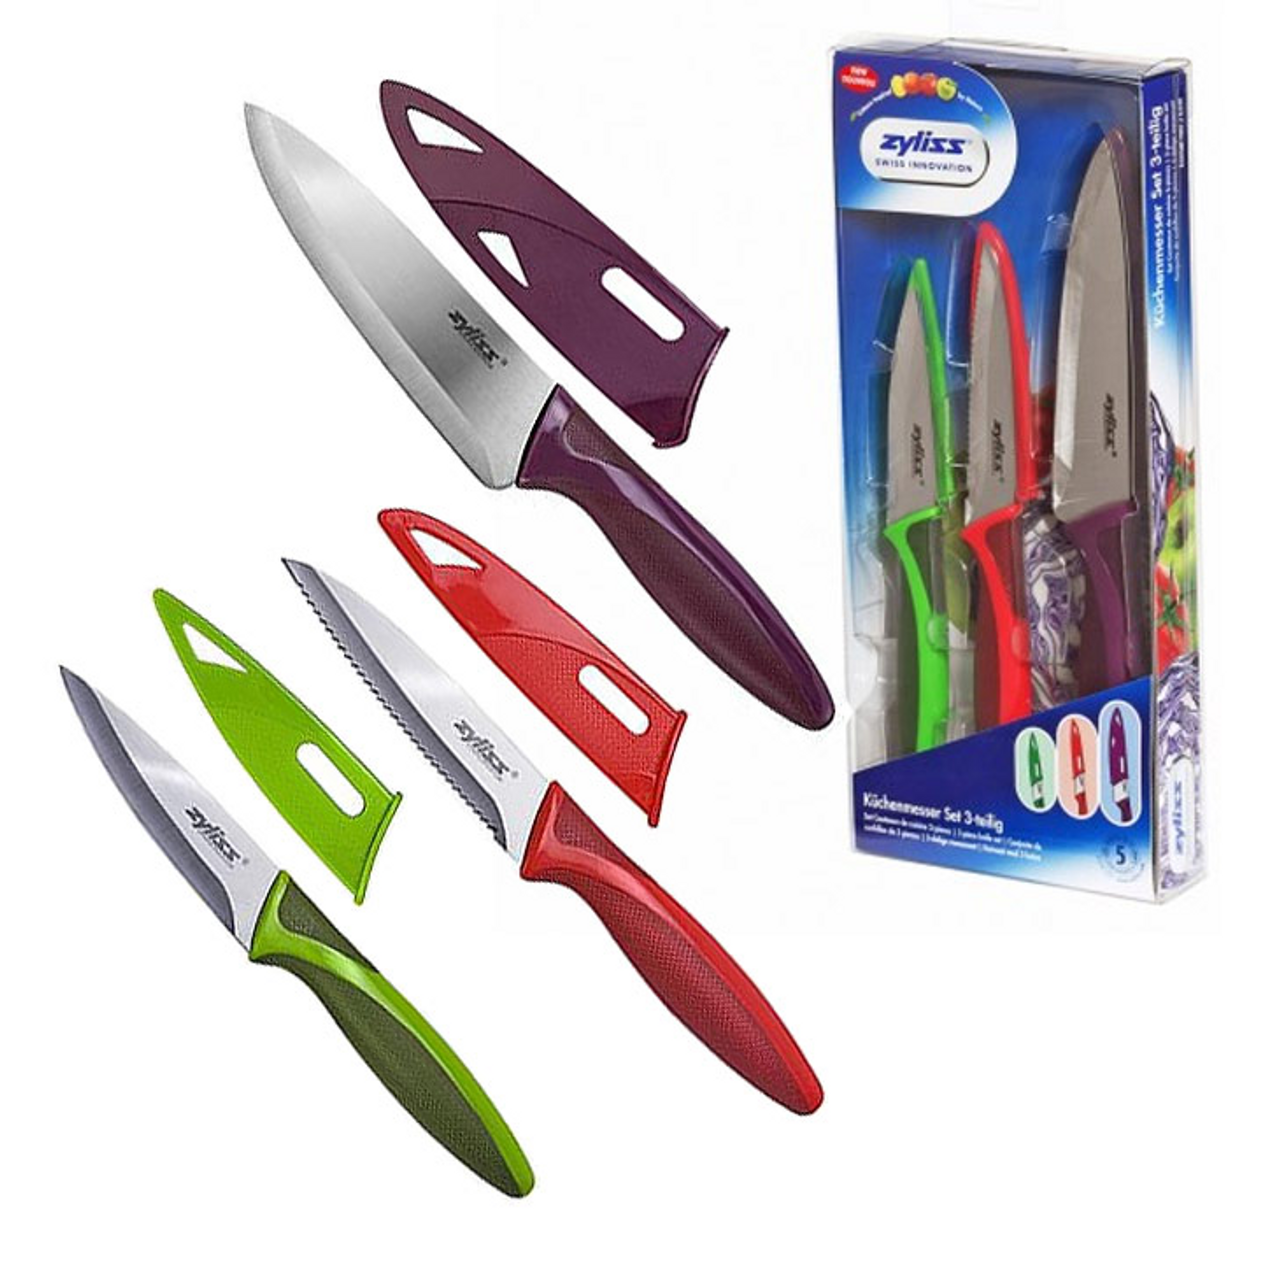 3 Piece Knife Set with Covers